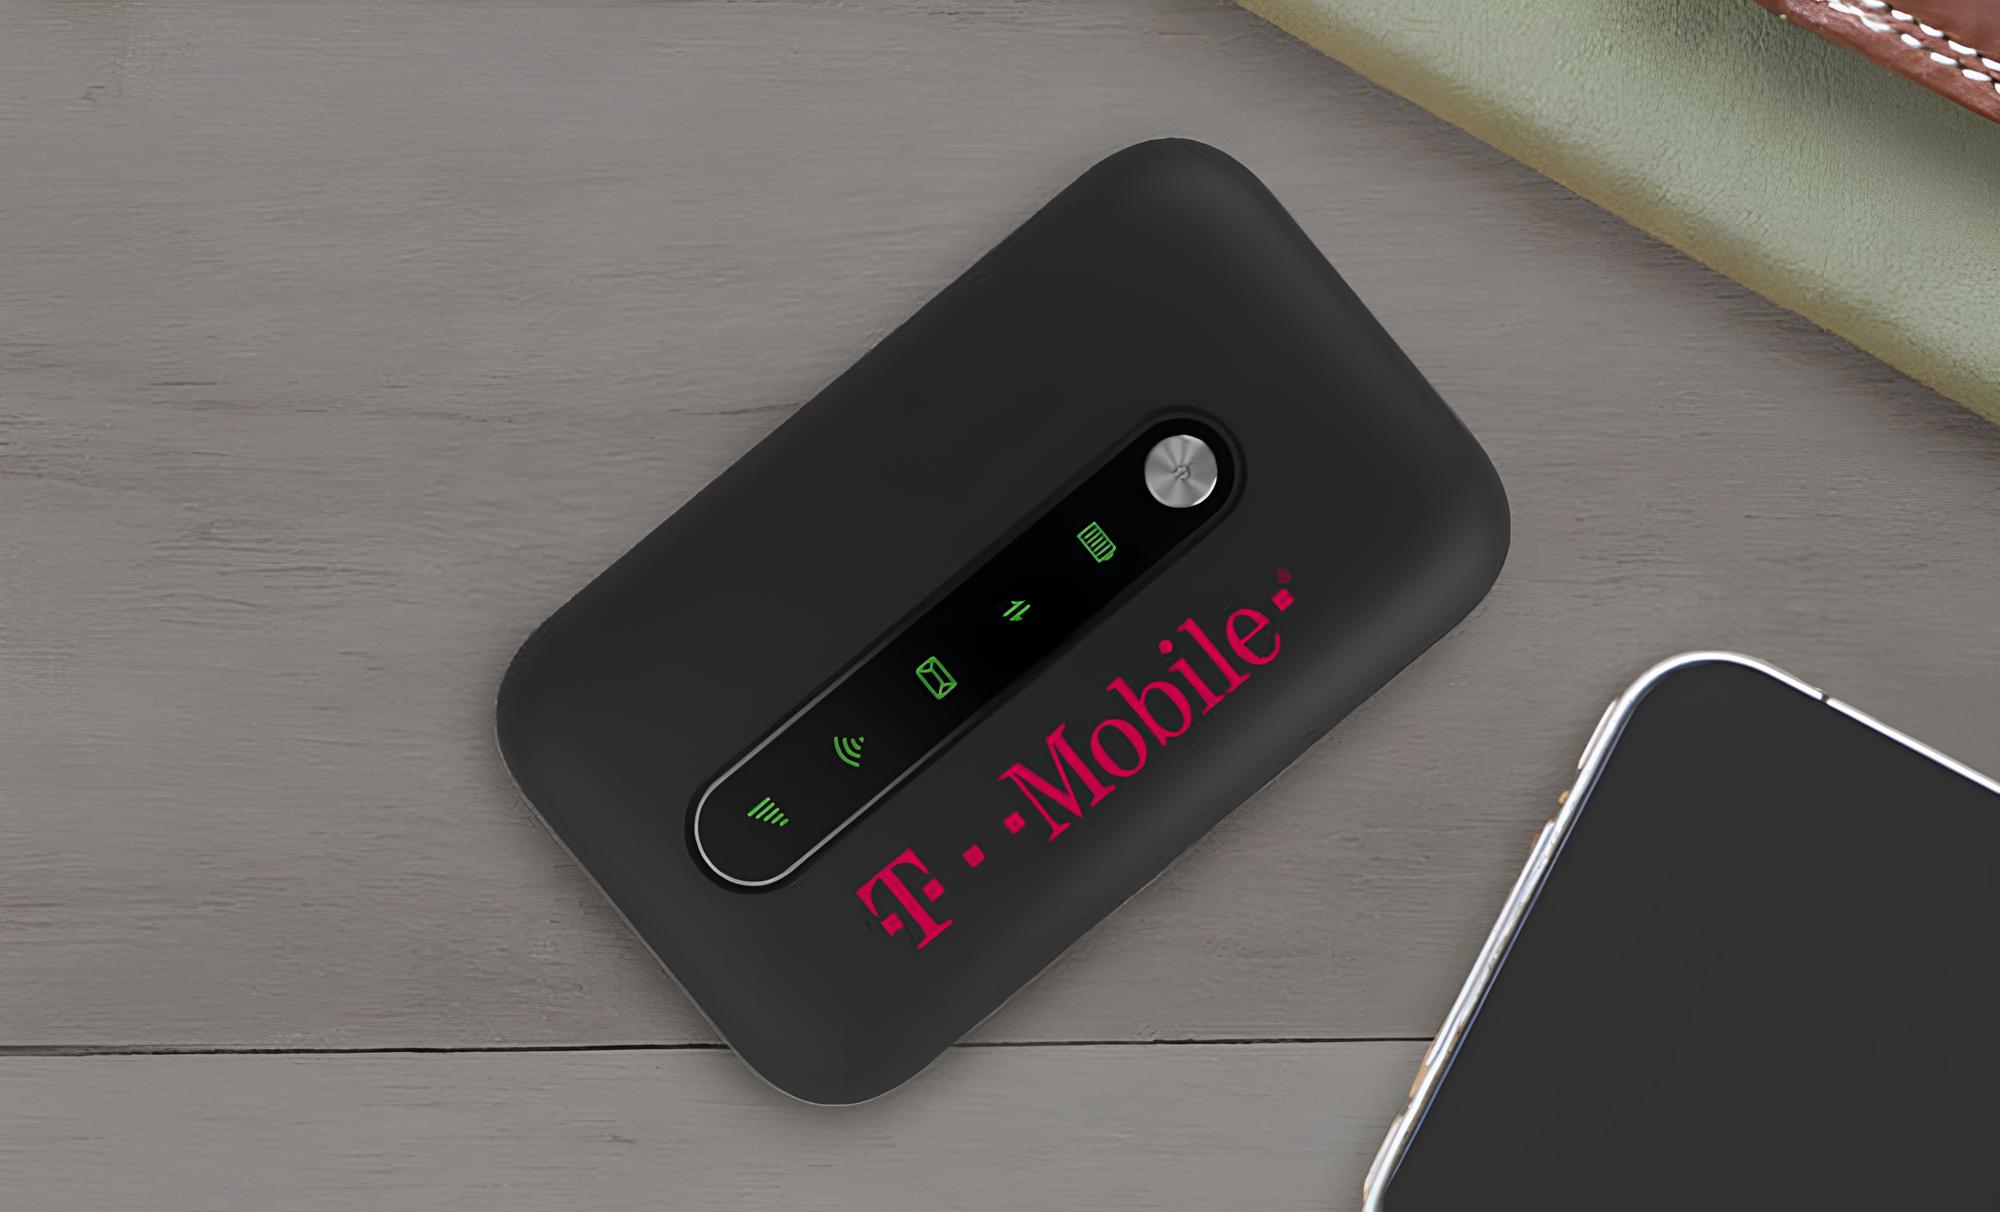 resetting-your-t-mobile-hotspot-device-step-by-step